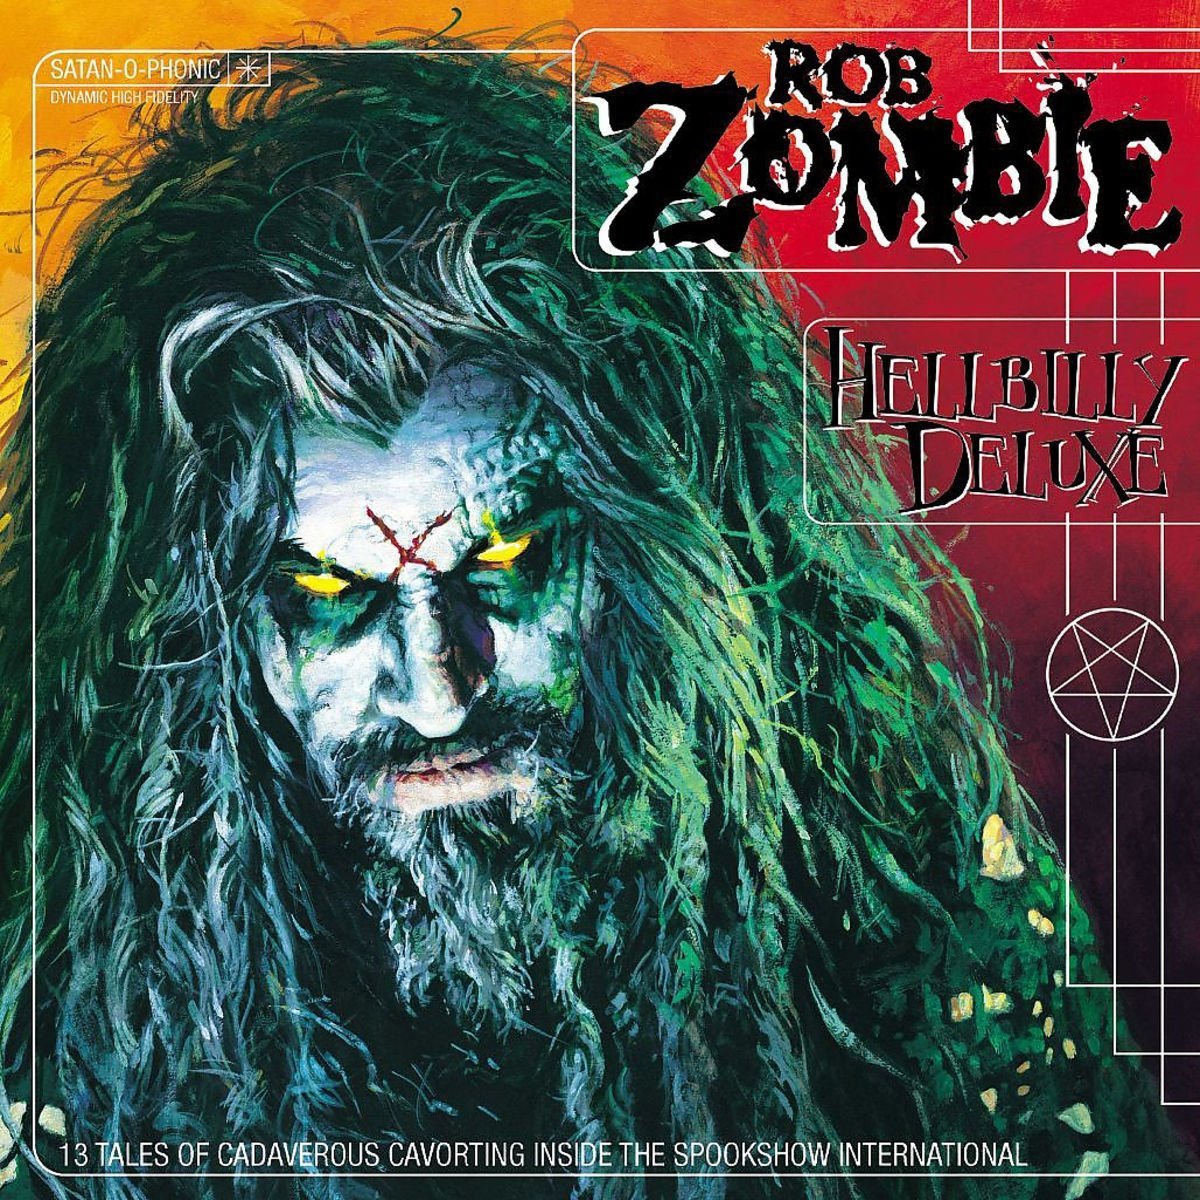 In the Summer of 1998, White Zombie frontman Rob Zombie released his first solo album, "Hellbilly Deluxe: 13 Tales of Cadaverous Cavorting Inside the Spookshow International," known to most as Hellbilly Deluxe. It was a hit. (2/21)